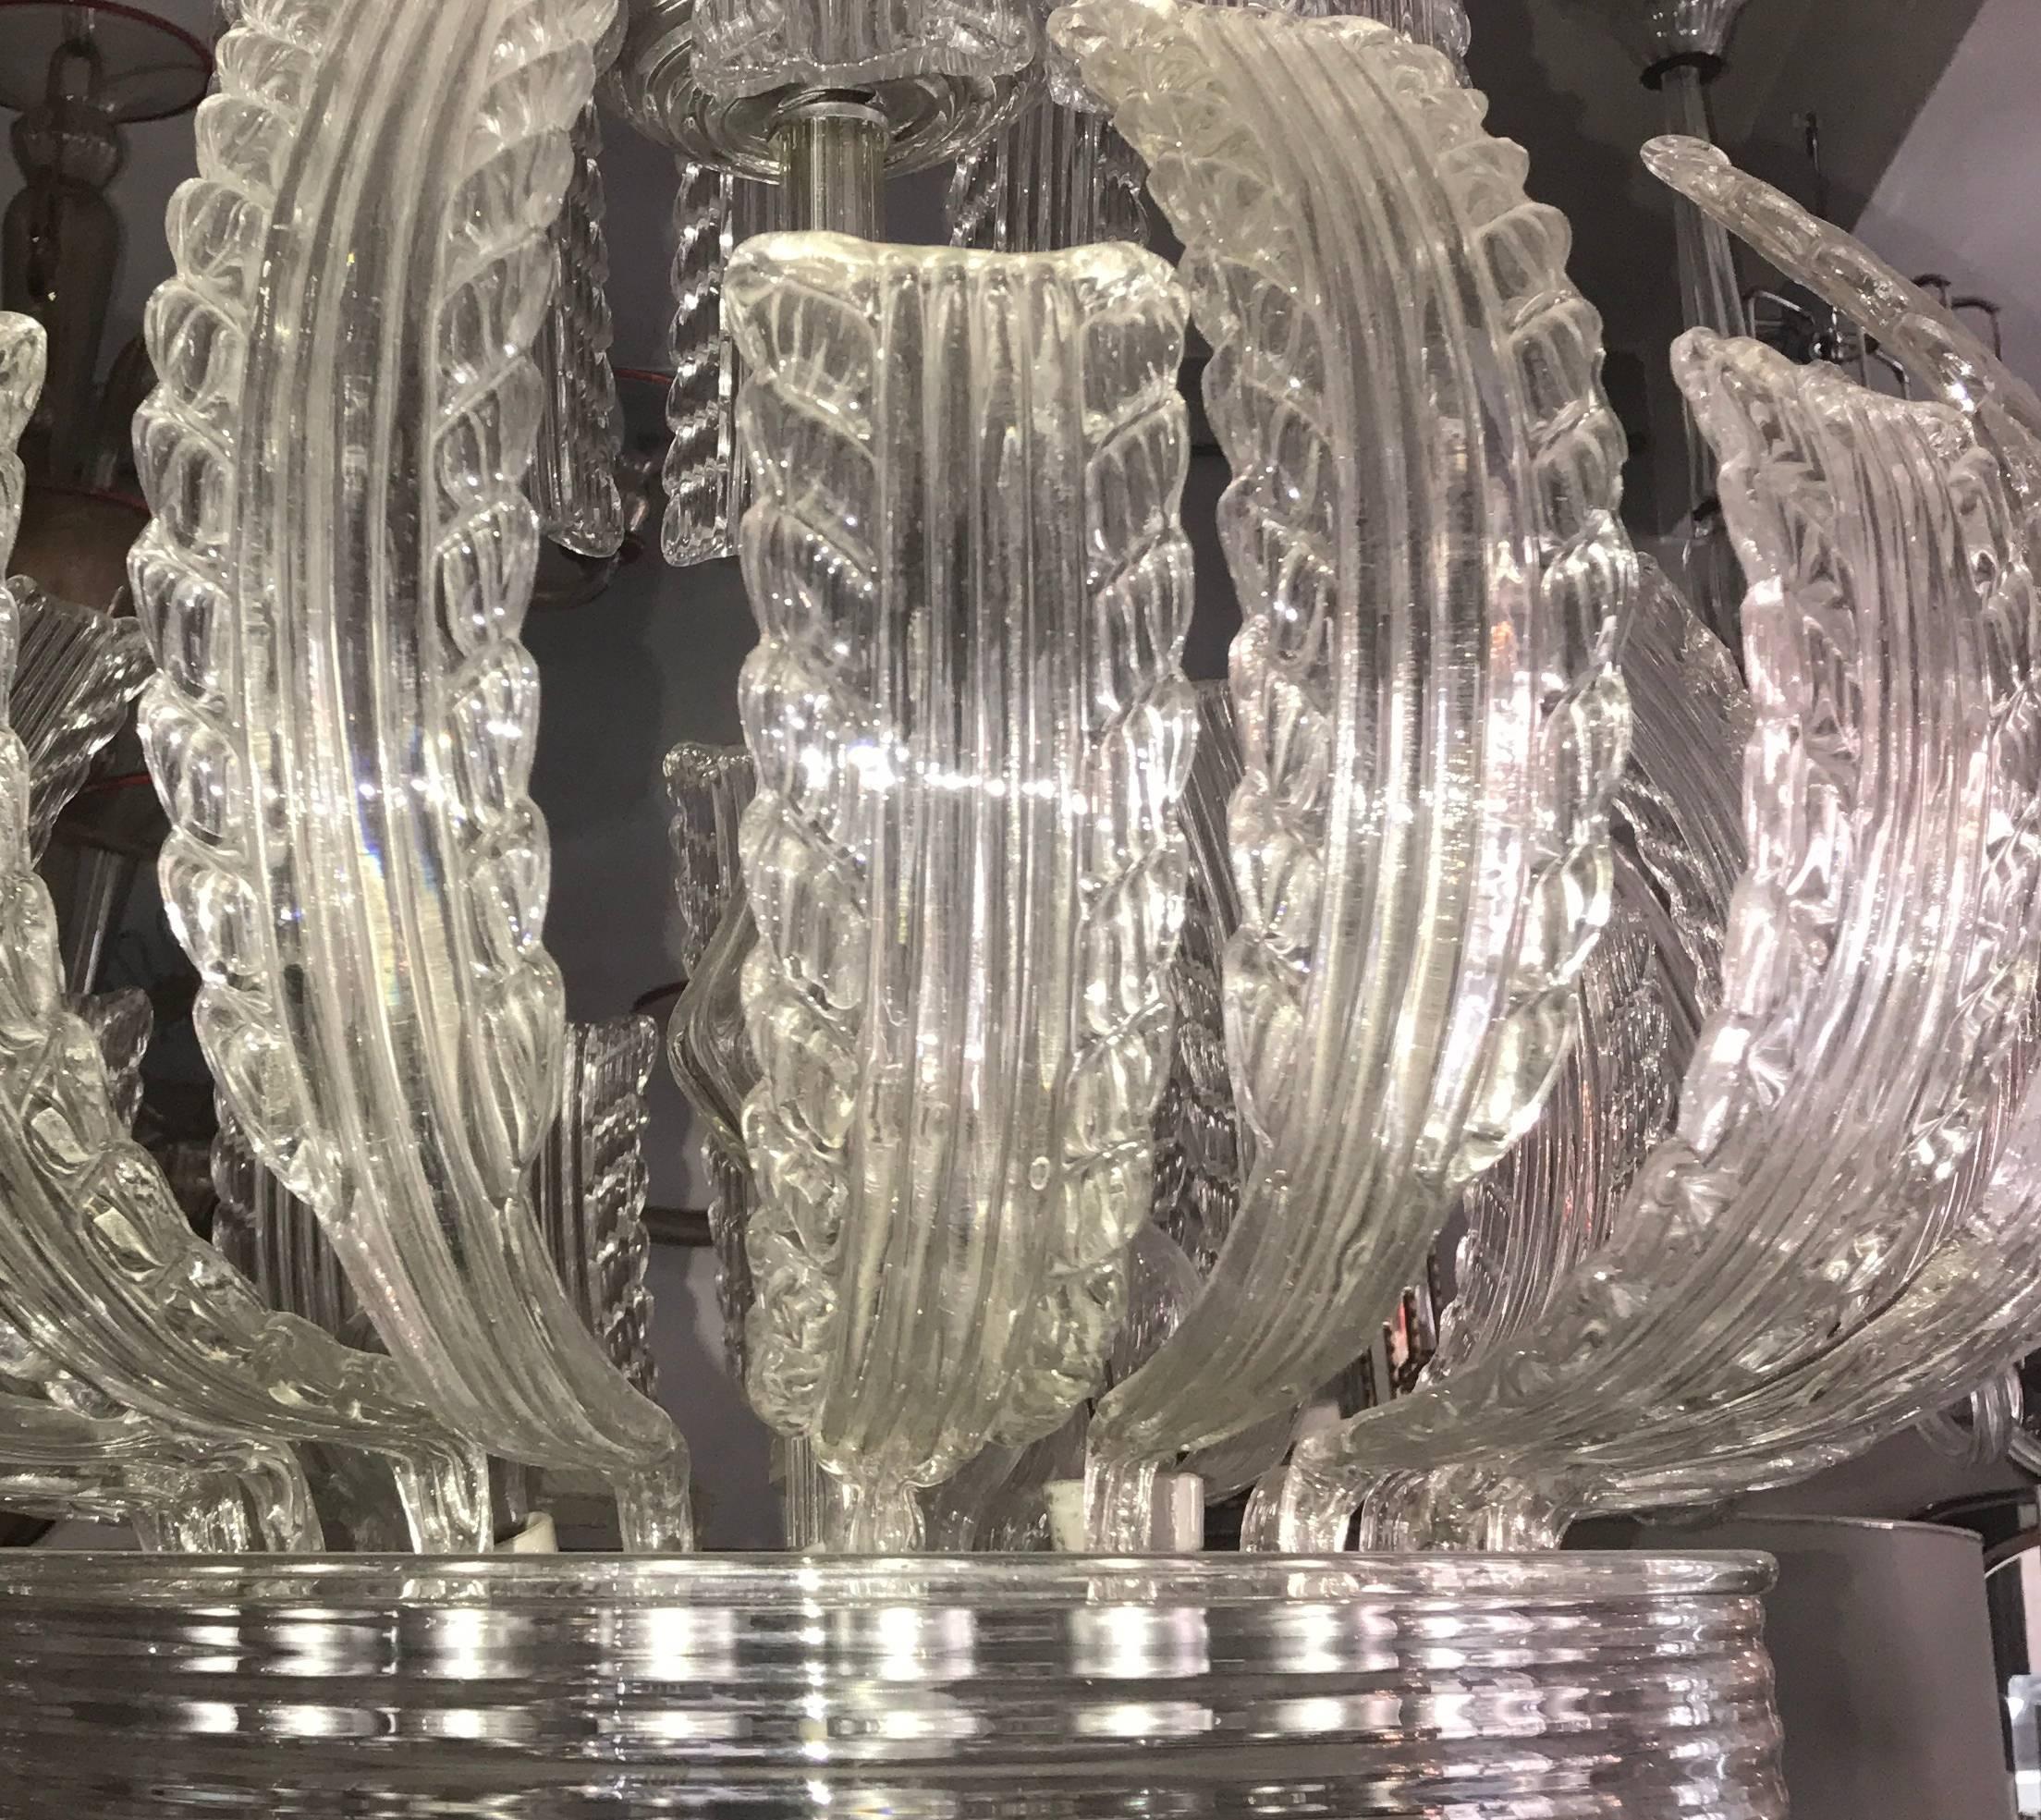 All glass parts are in excellent original vintage condition. Piece of great value and elegance designed by Ercole Barovier, 1930-1940.